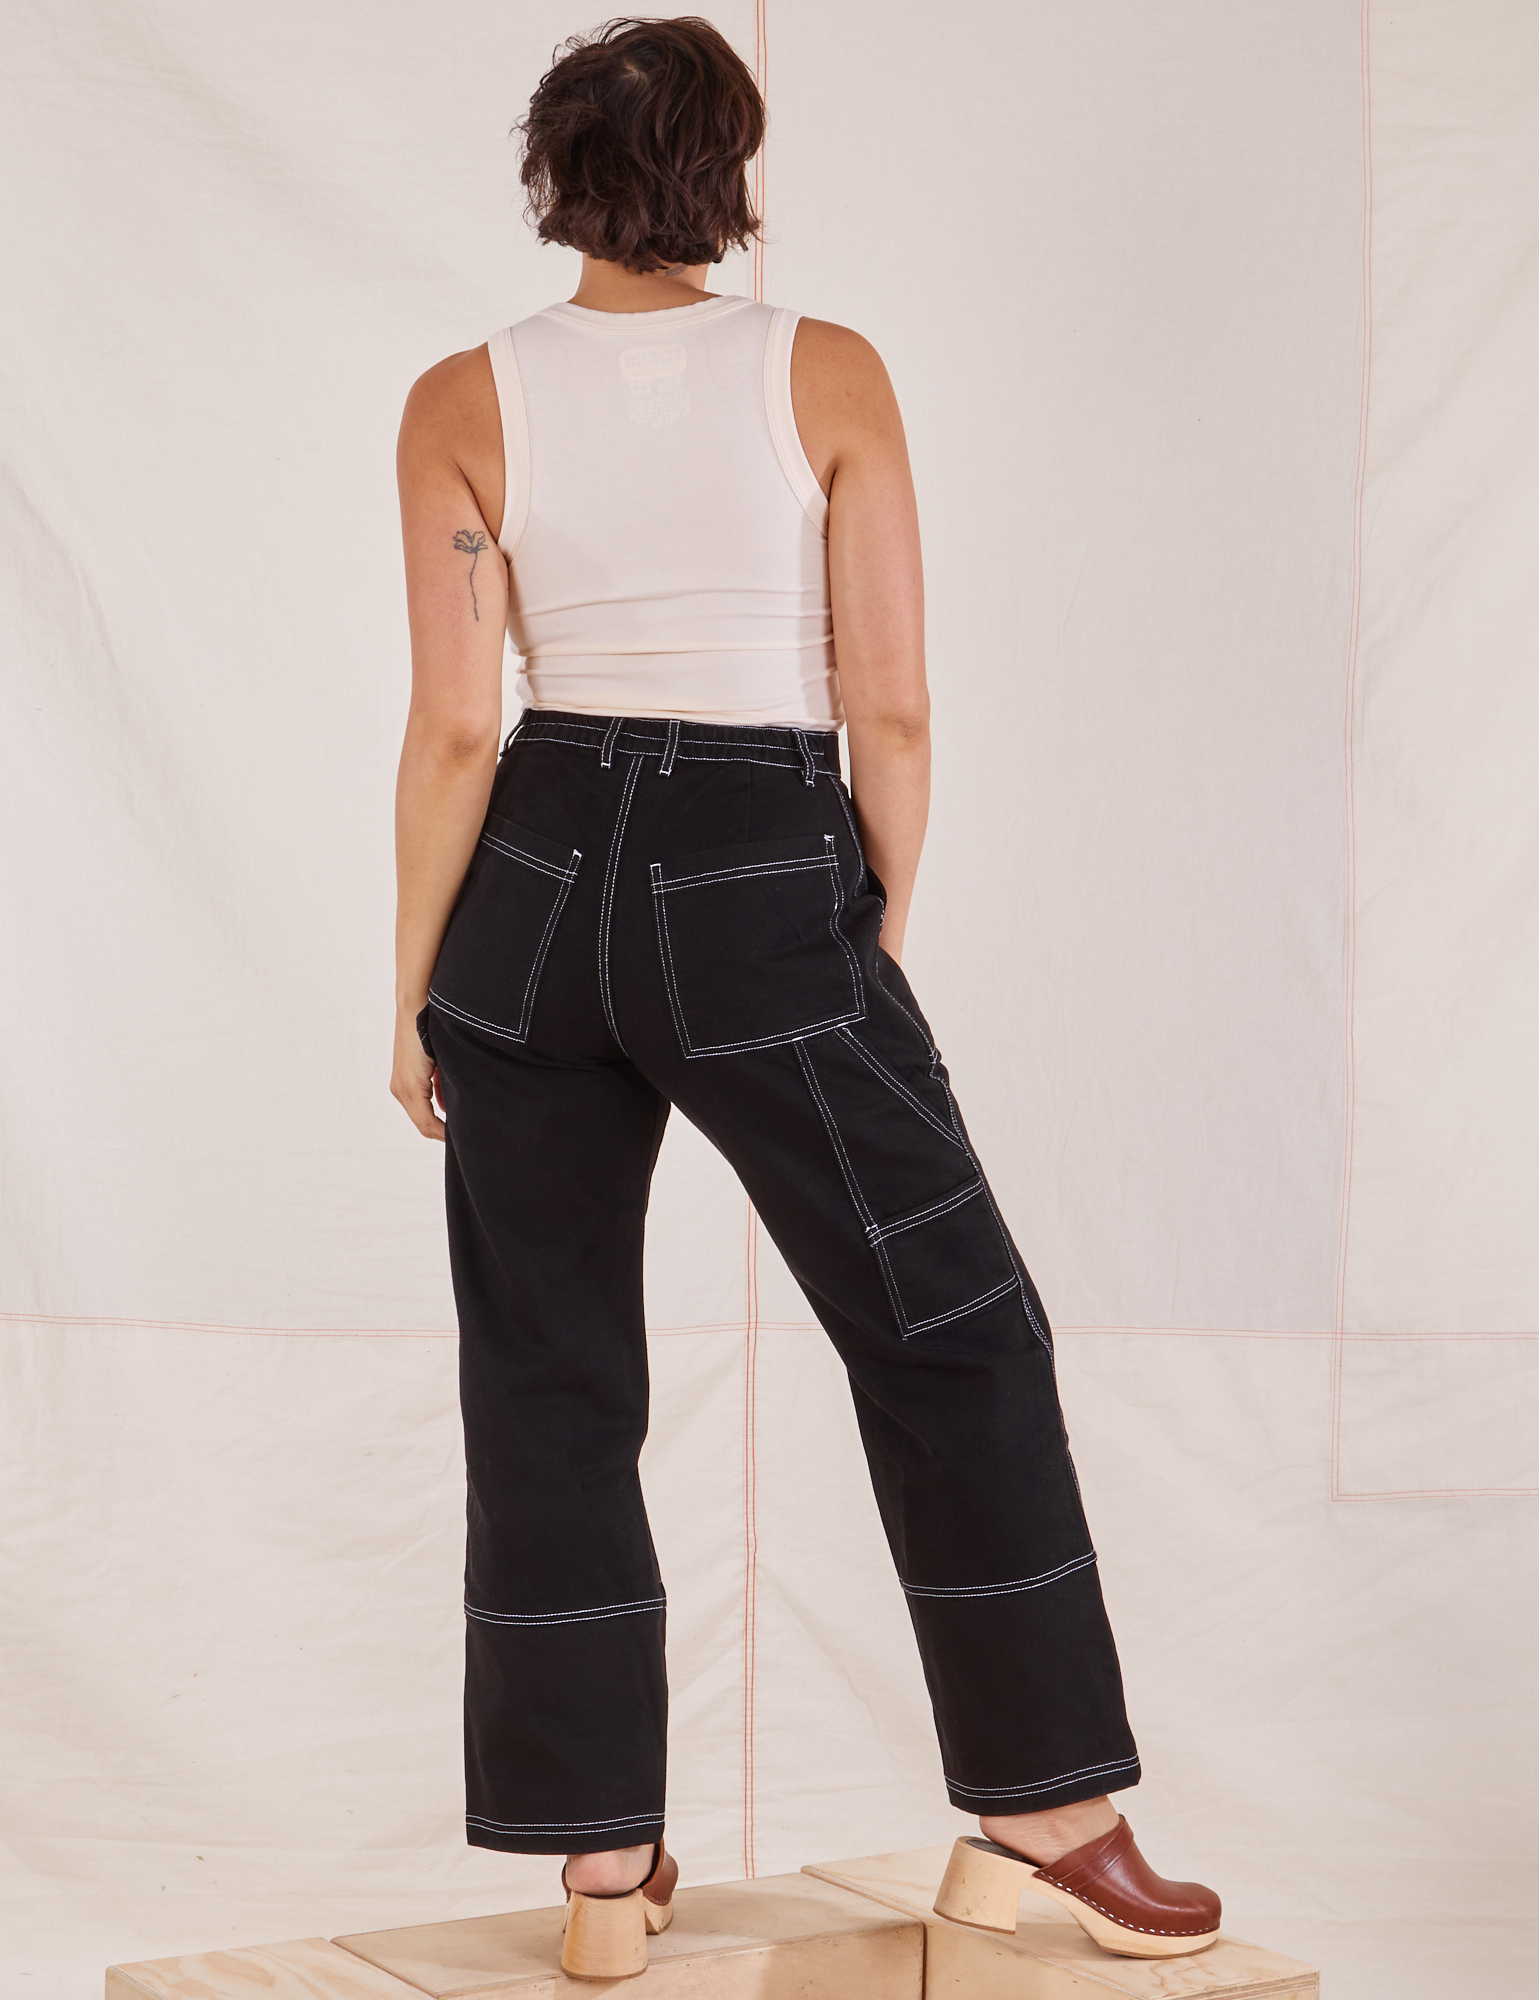 Back view of Carpenter Jeans in Black and Tank Top in vintage tee off-white worn by Tiara